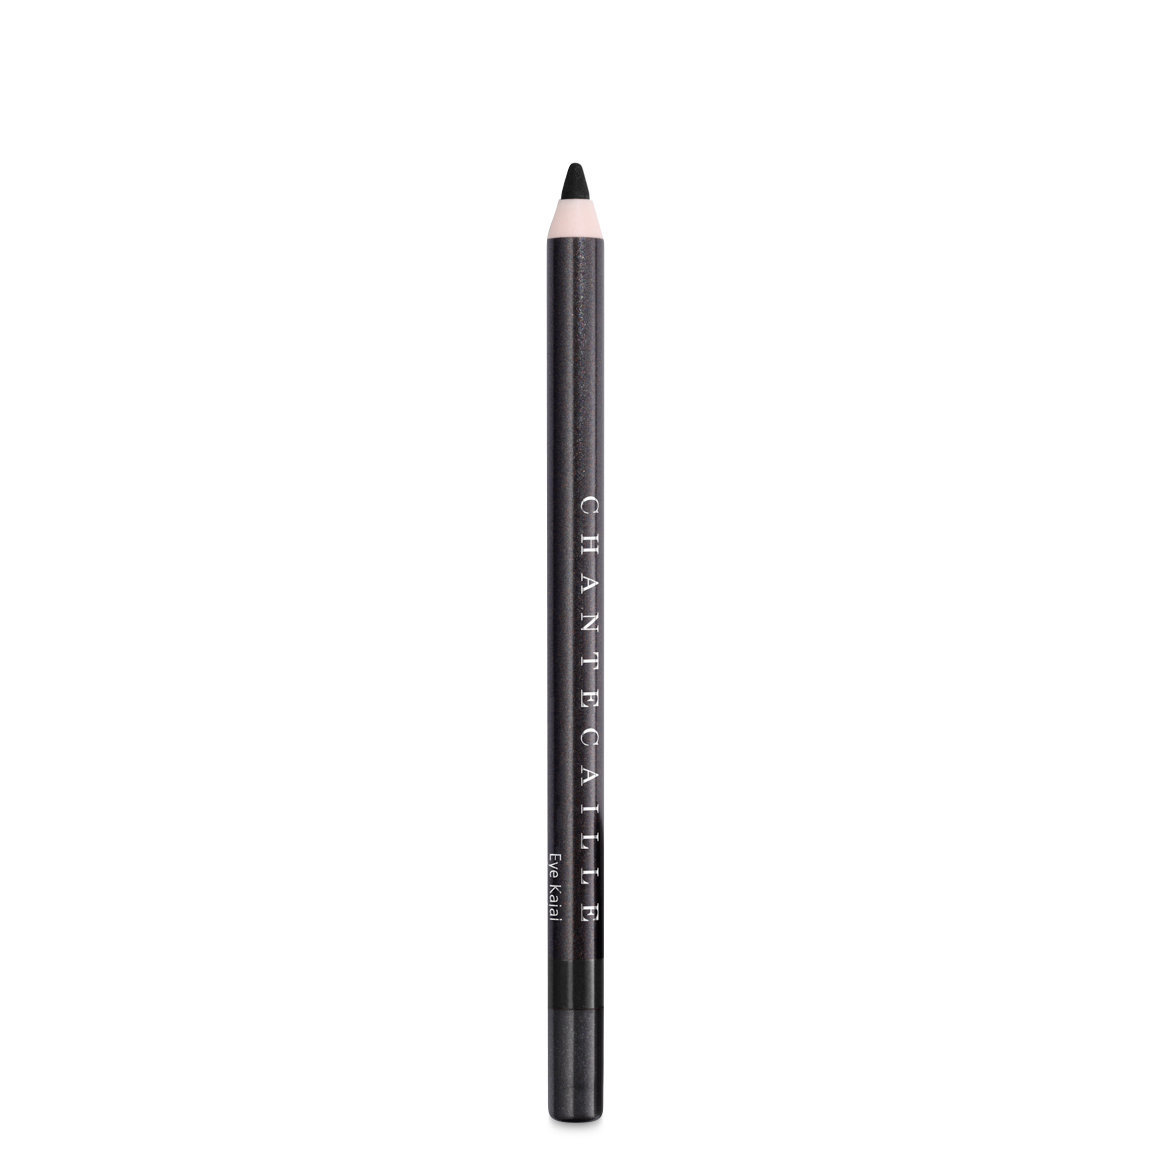 Chantecaille Brightening Eye Kajal alternative view 1 - product swatch.